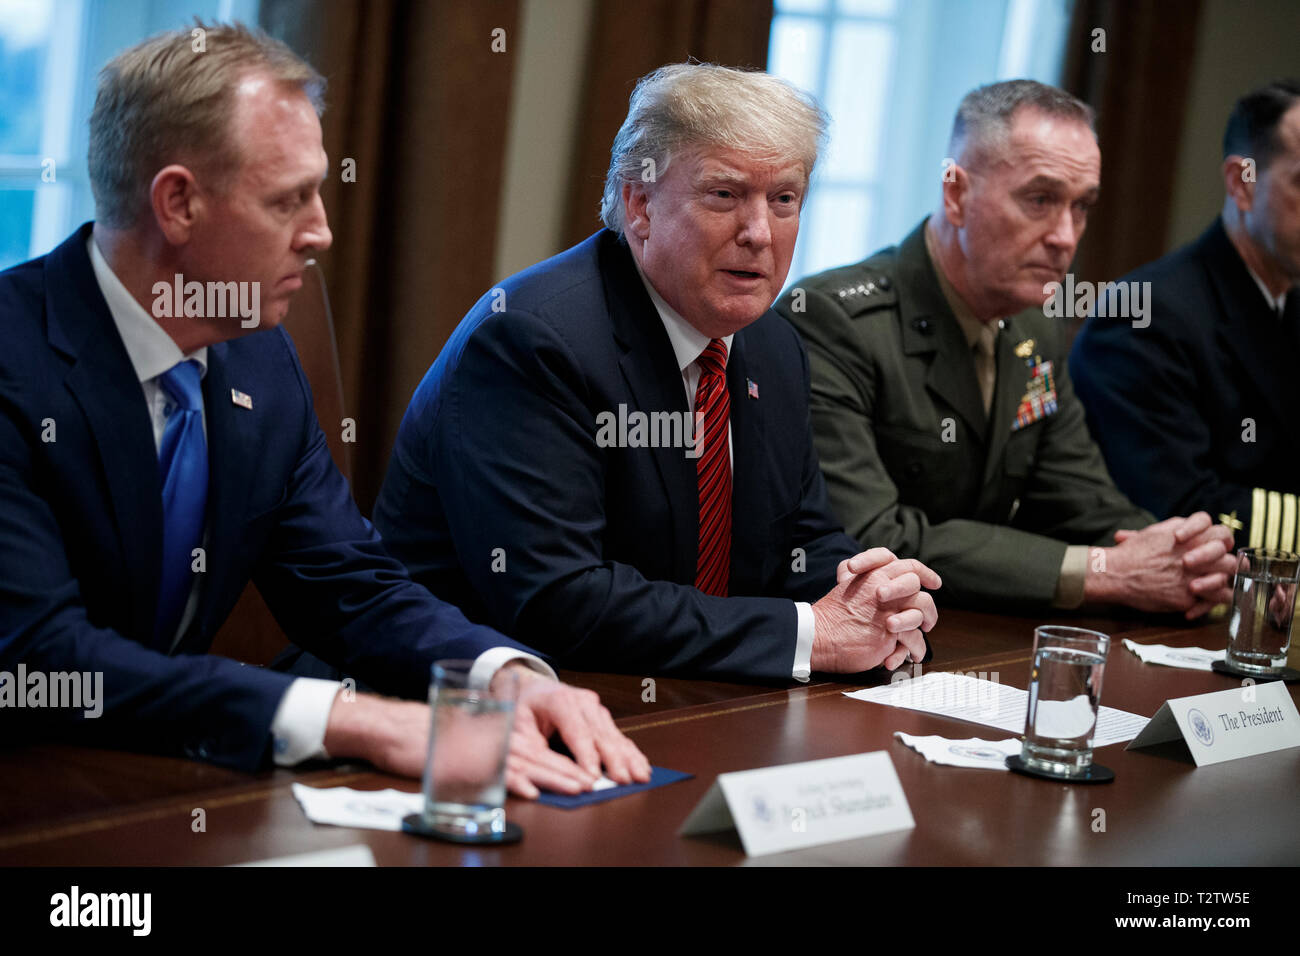 US President Donald J. Trump (C), with Acting Secretary of Defense Patrick Shanahan (L) and Chairman of the Joint Chiefs of Staff General Joseph Dunford (R), delivers remarks during a briefing by senior military leaders in the Cabinet Room of the White House in Washington, DC, USA, 03 April 2019. Following the briefing President Trump will host a dinner for the officials. Credit: Shawn Thew/Pool via CNP /MediaPunch Stock Photo